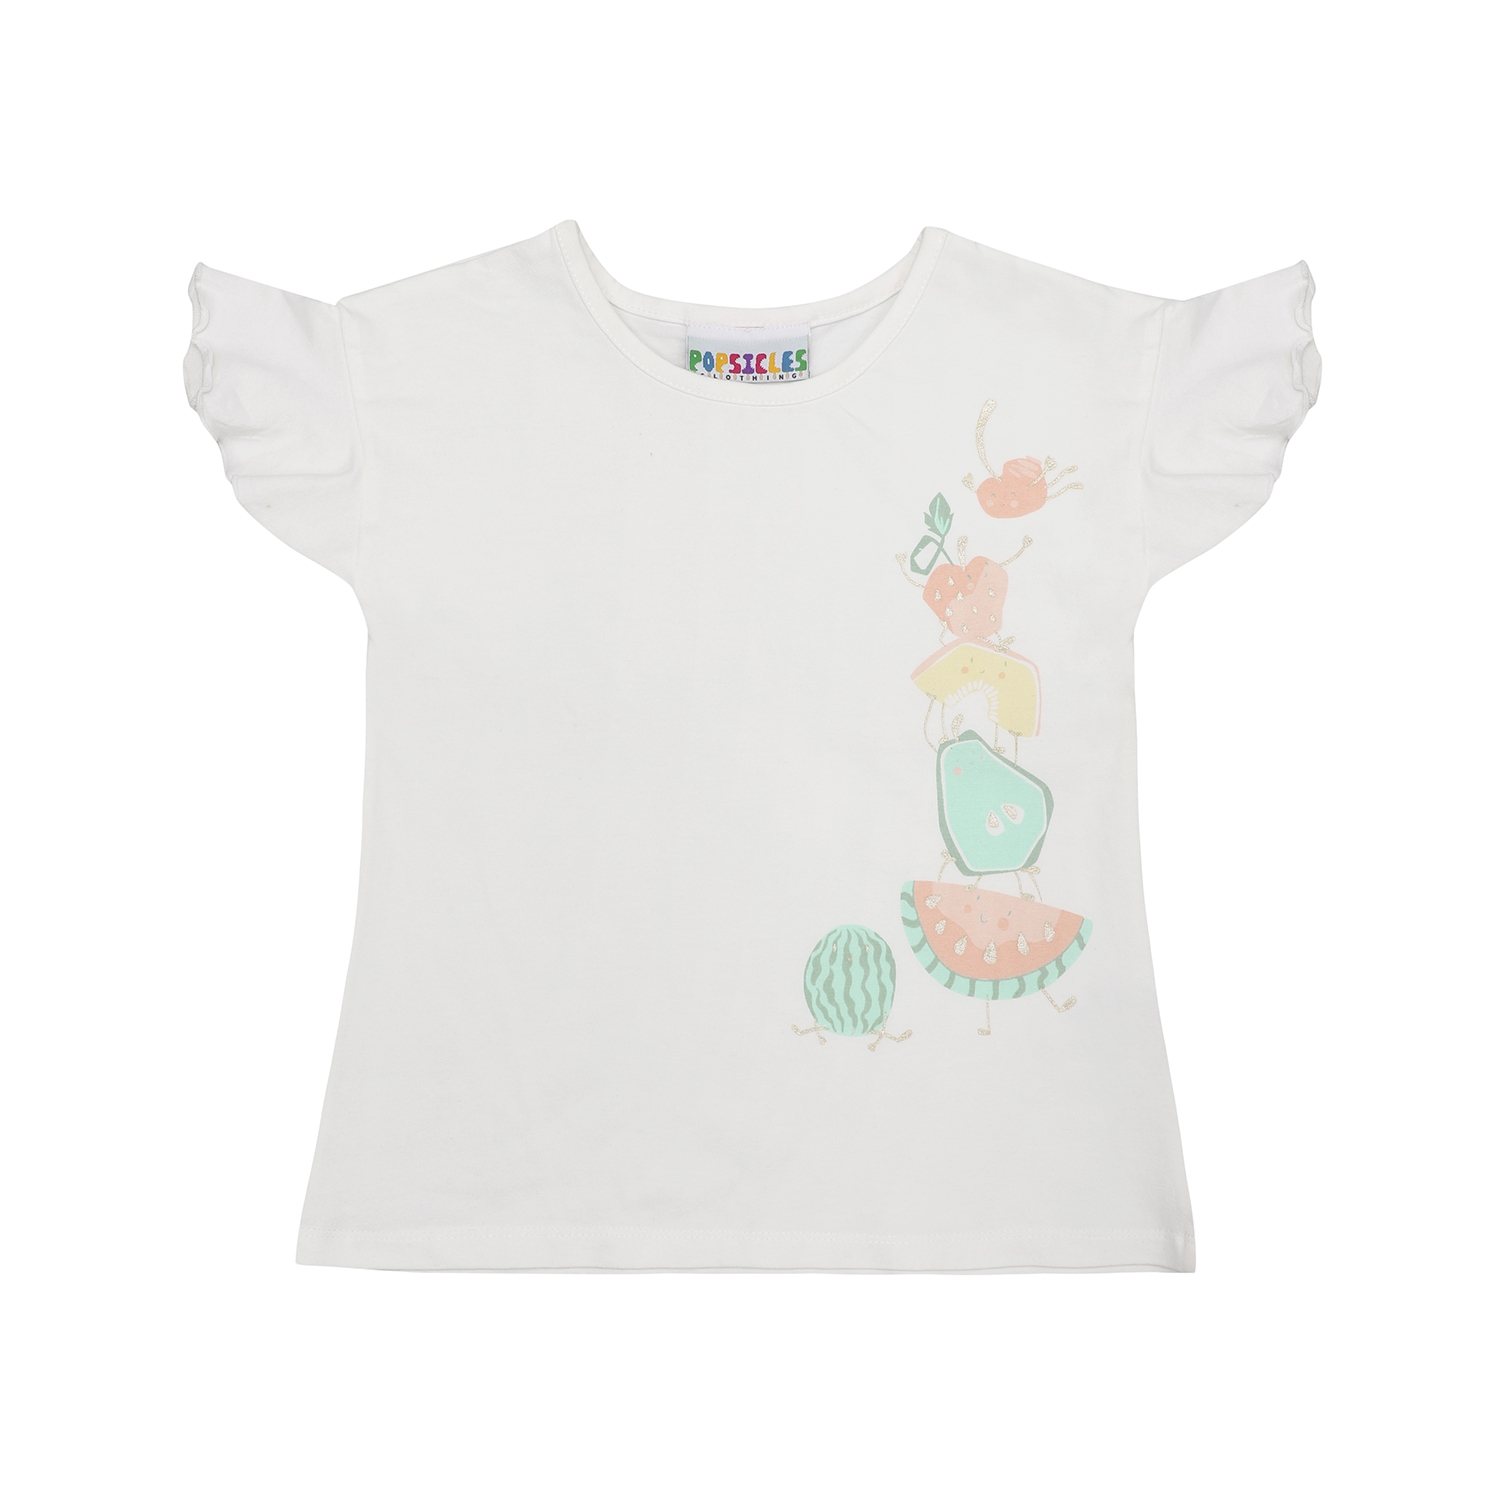 Popsicles Clothing | Popsicles Soft Cotton Comfort fit Round Neck Cap Sleeves Girls Top - Off White  (0-6M)